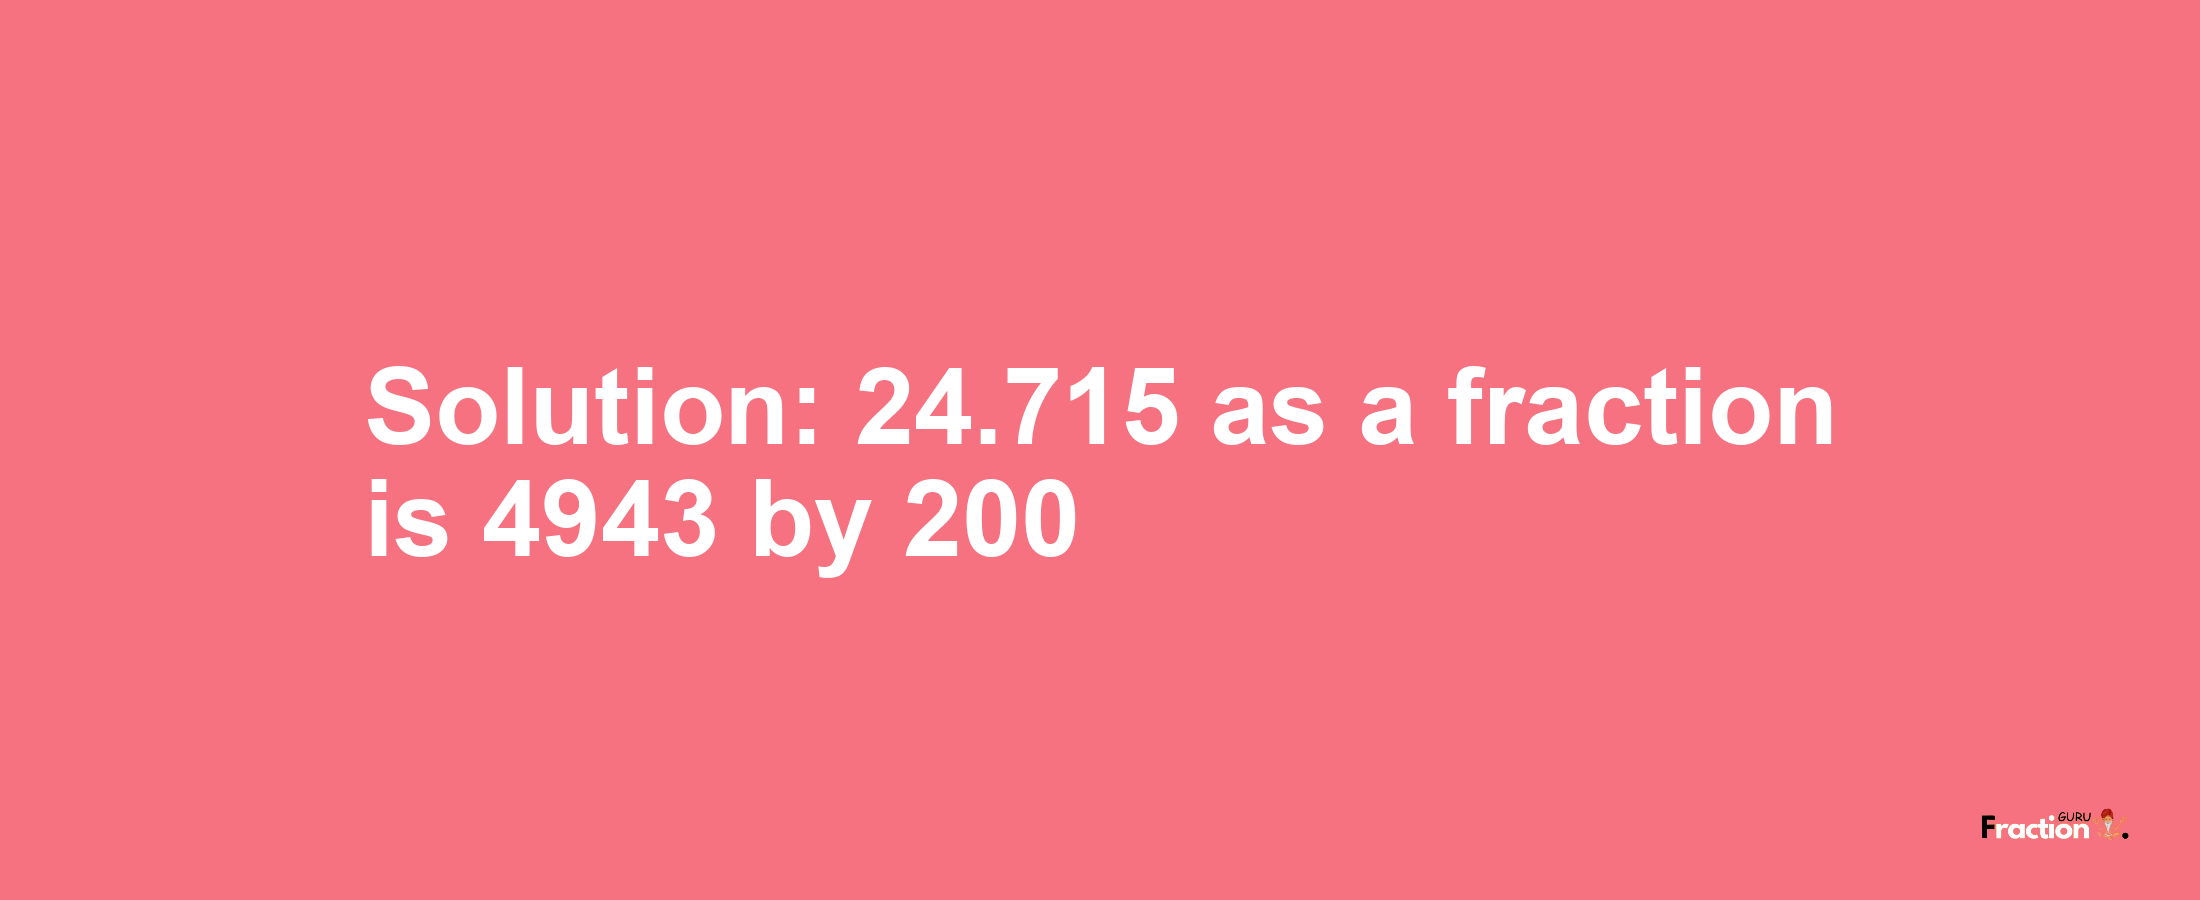 Solution:24.715 as a fraction is 4943/200